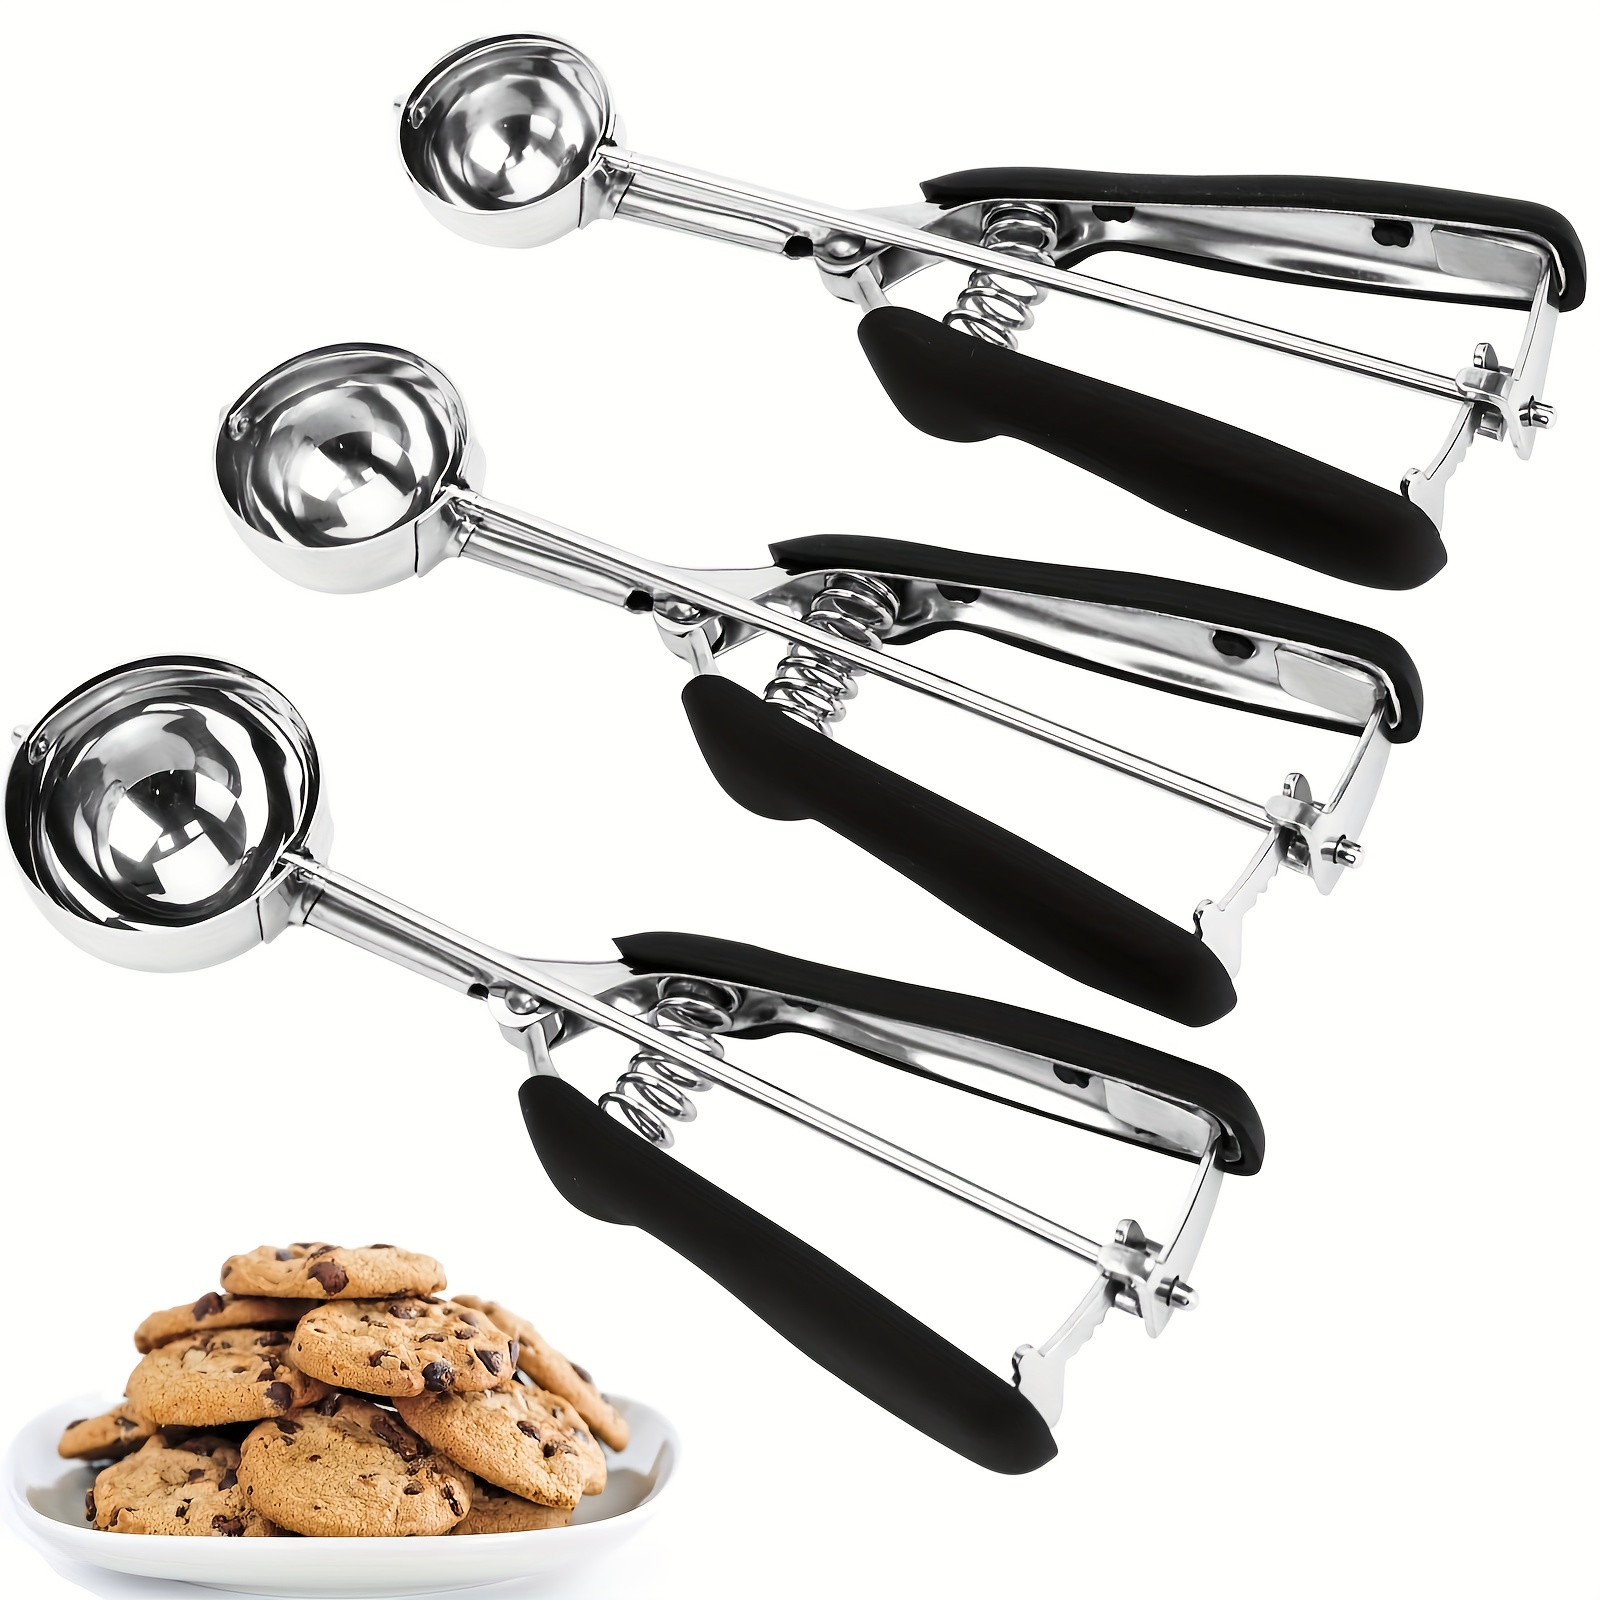 Stainless Steel Ice Cream Scoop Set, 3 PCS 18/8 Stainless Steel Ice Cream  Scoop Trigger Include Large-Medium-Small Size,Cookie Scoop, Melon Scoop 